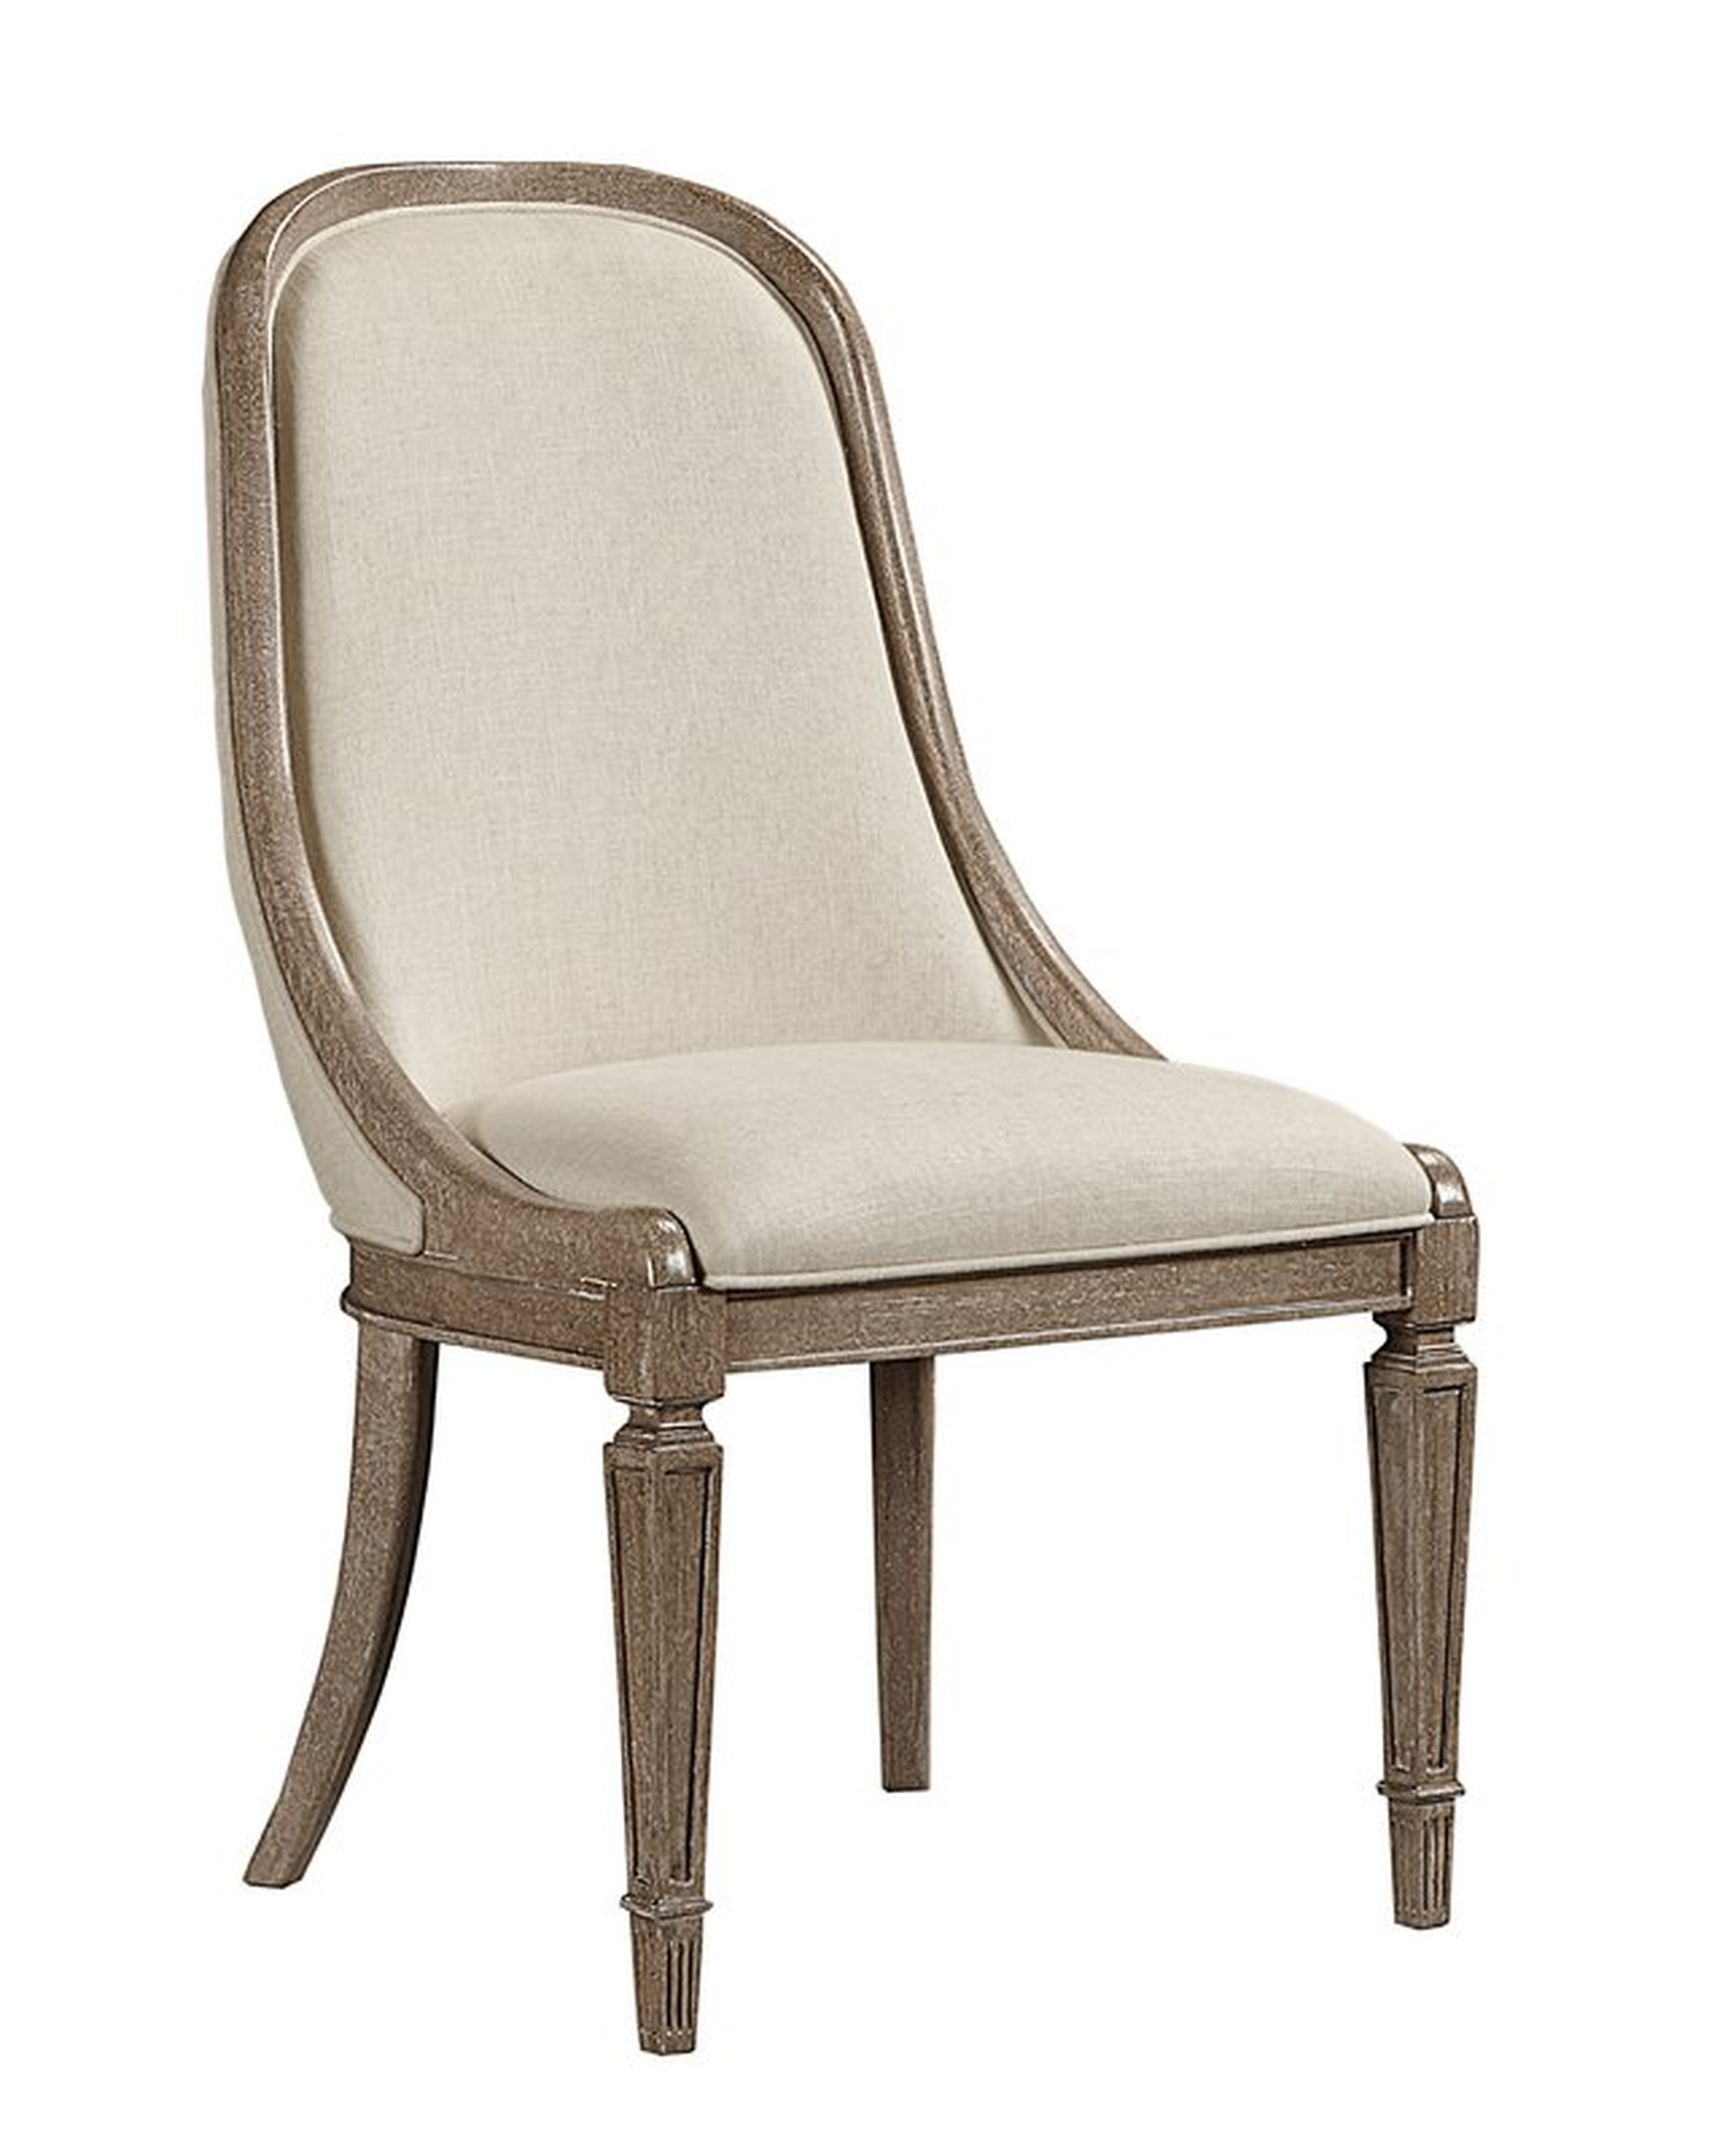 Wethersfield Estate Upholstered Dining Chair - Perigold